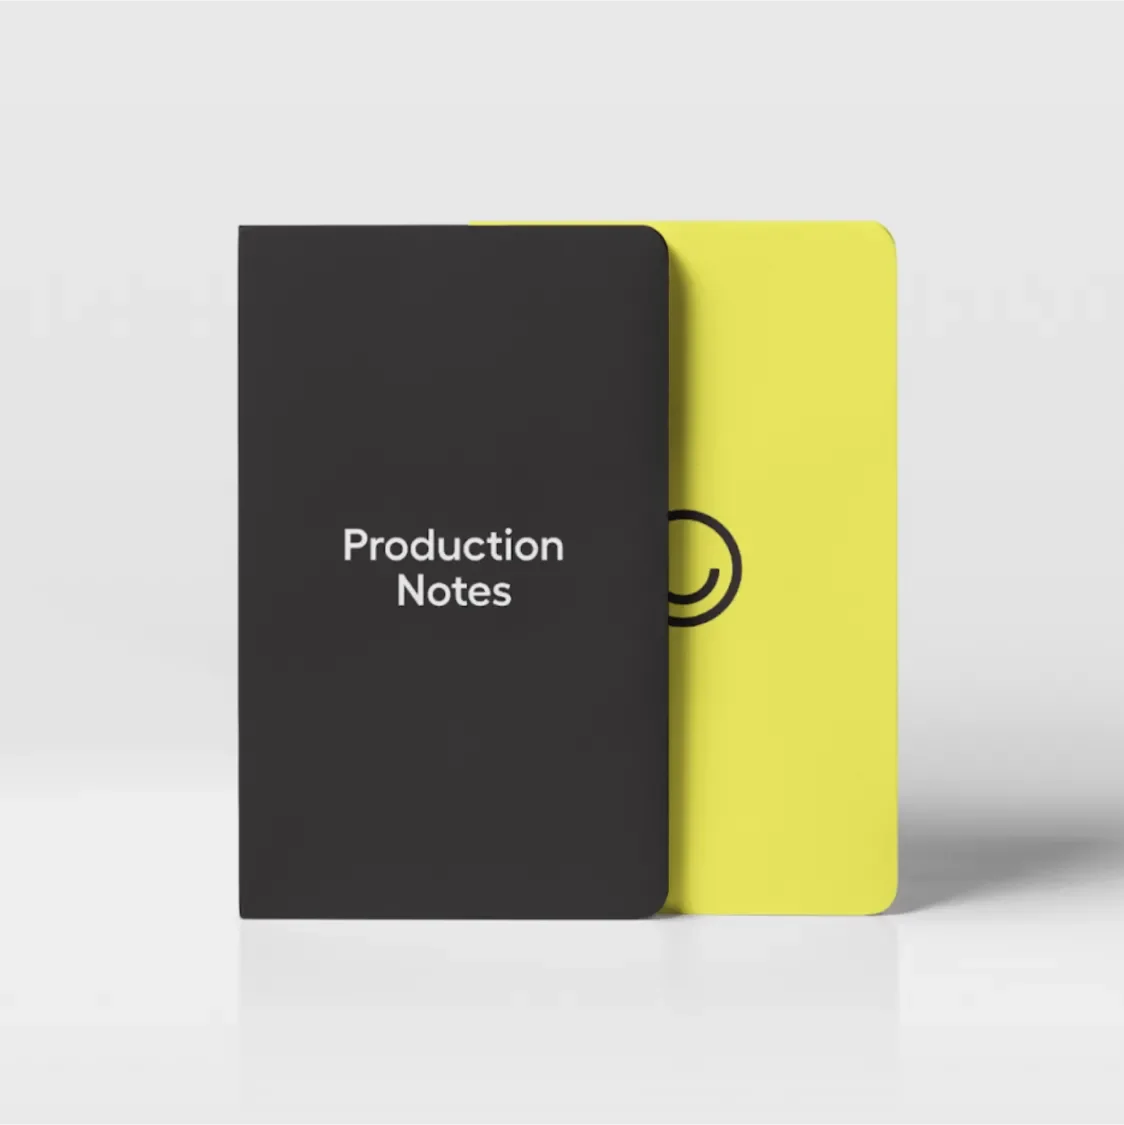 Pocket notebook with "Production Notes" against black on one side and the Hi-Lo smiley against yellow on the other